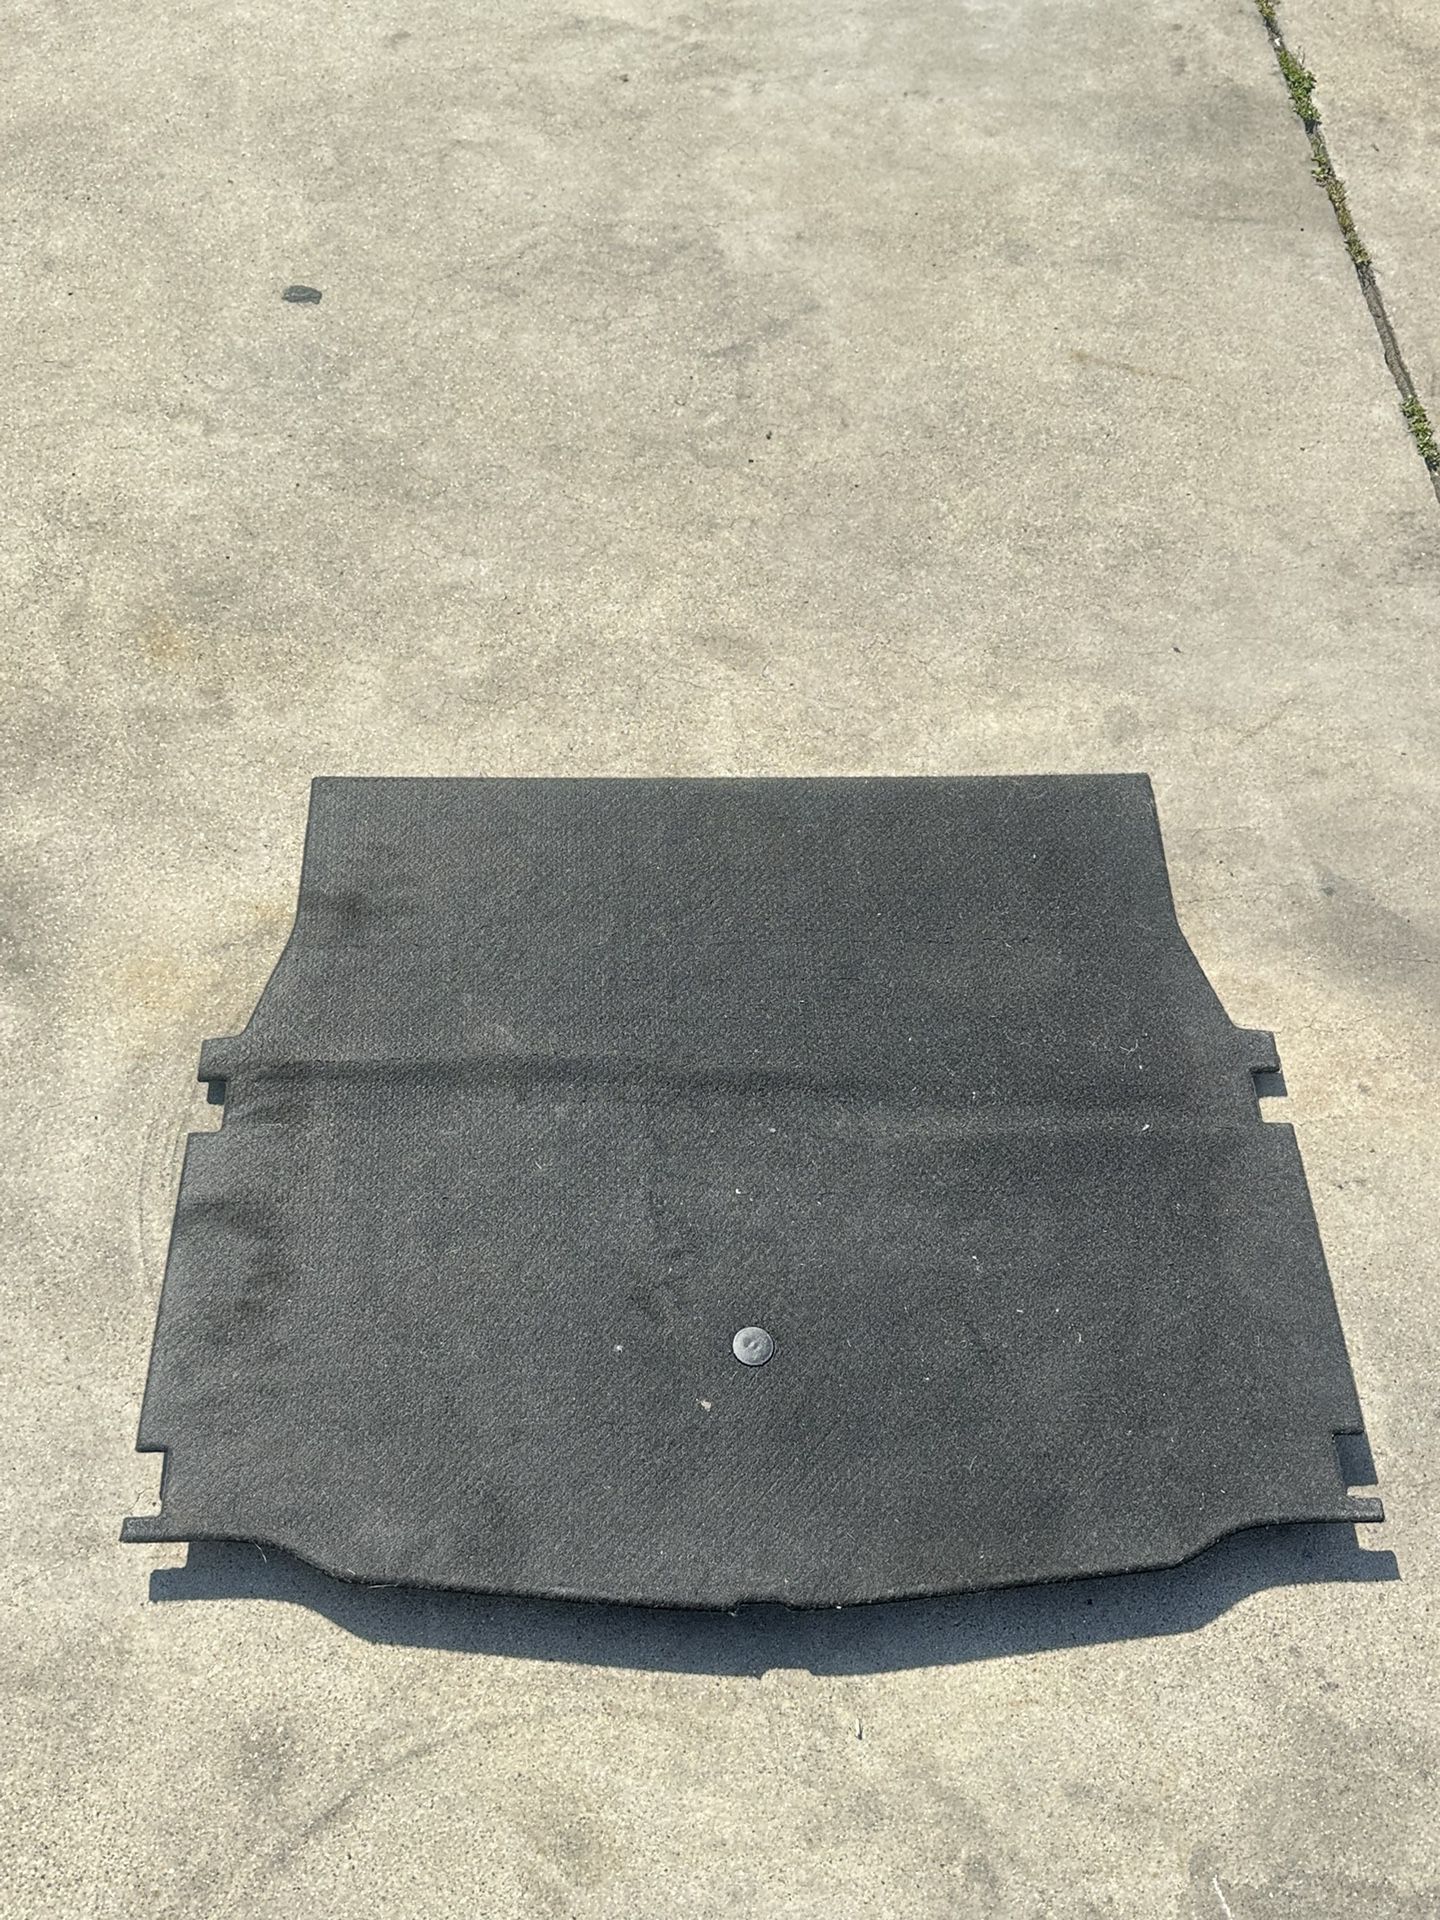 E46 BMW Trunk Cover Panel